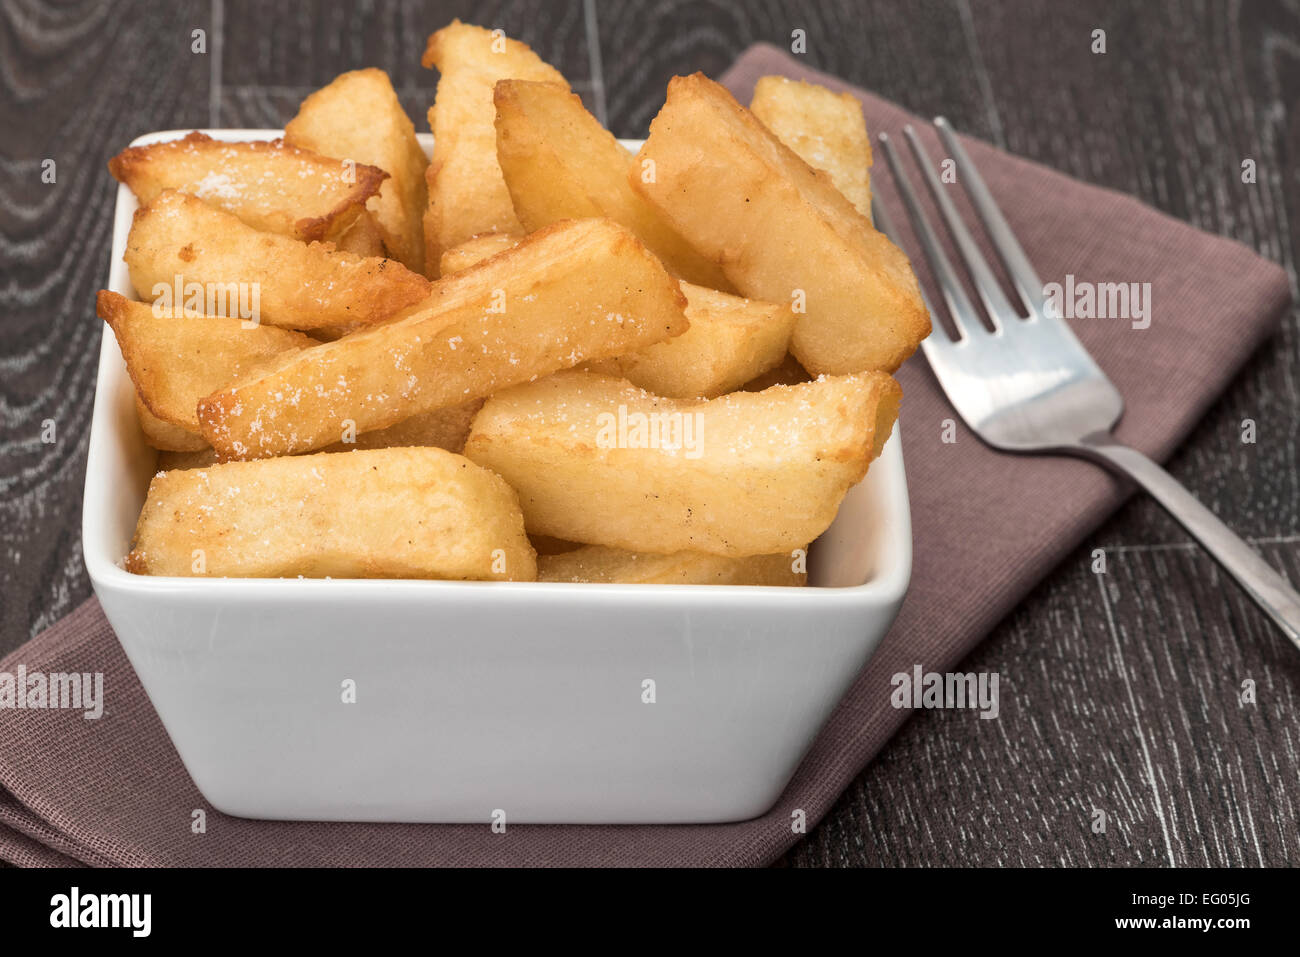 Close-up of a bowl of chunky fries or potato chips - studio shot Stock Photo